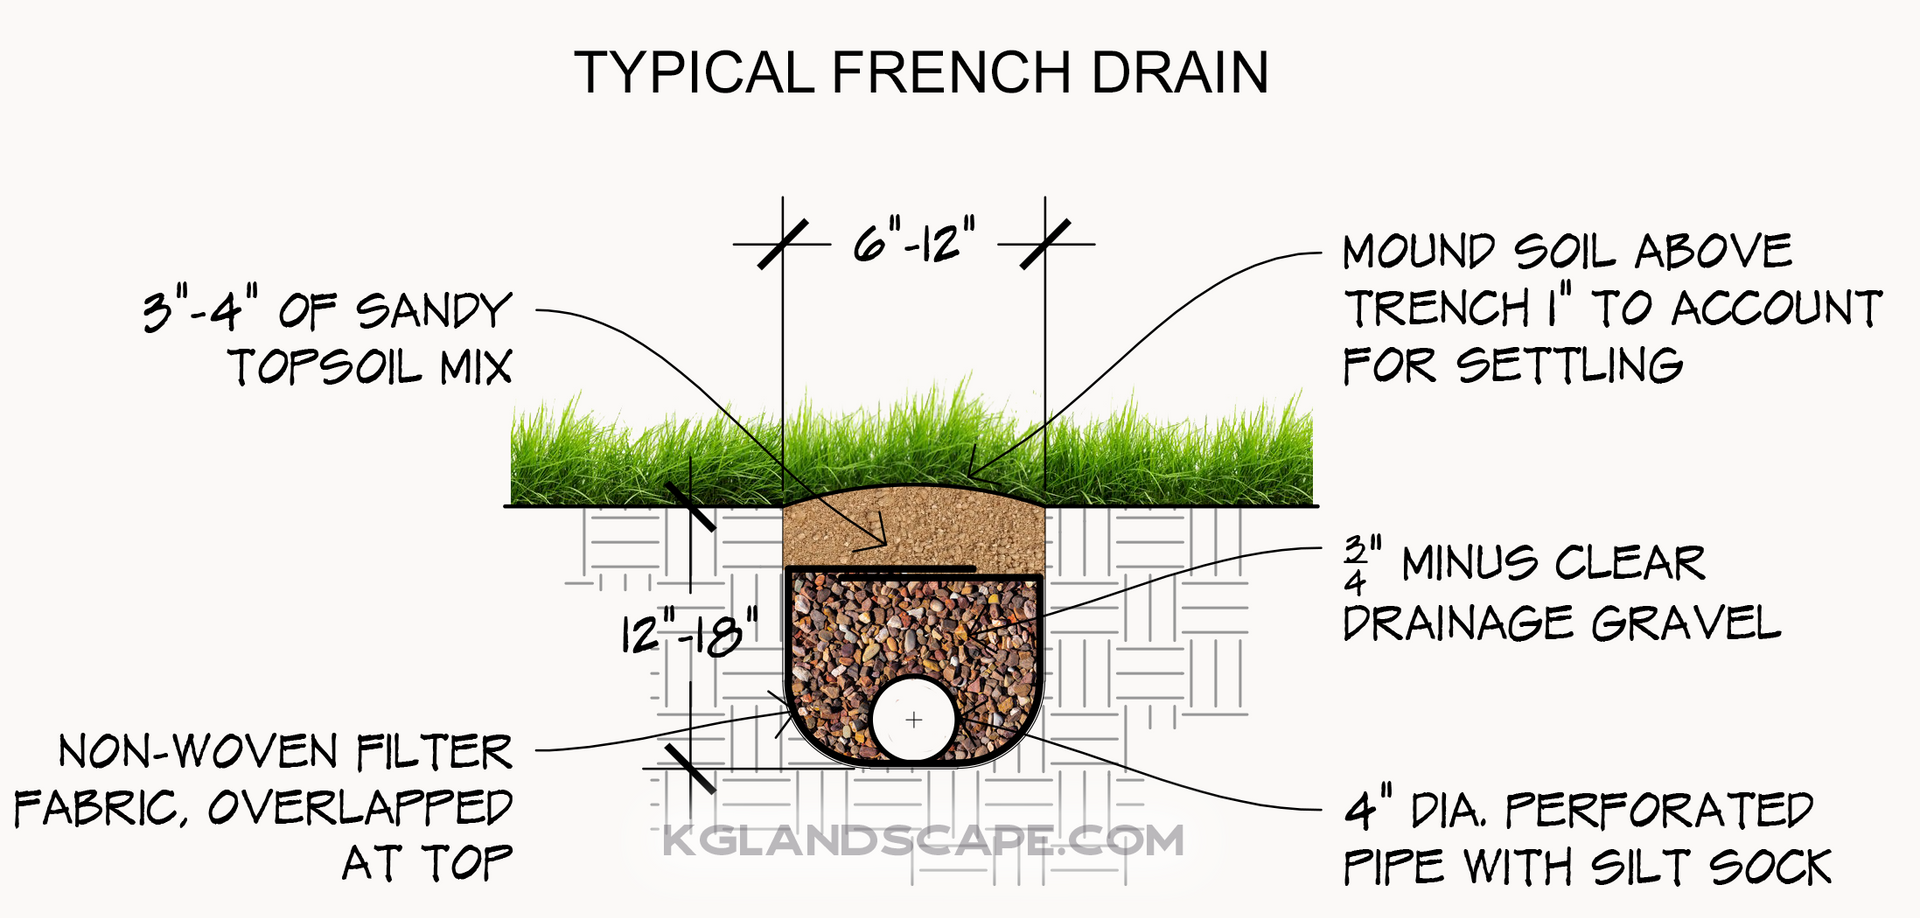 French drain diagram how to build a French drain gravel pipe drainage solution MN outdoor water ideas KG Minneapolis St. Paul wet yard